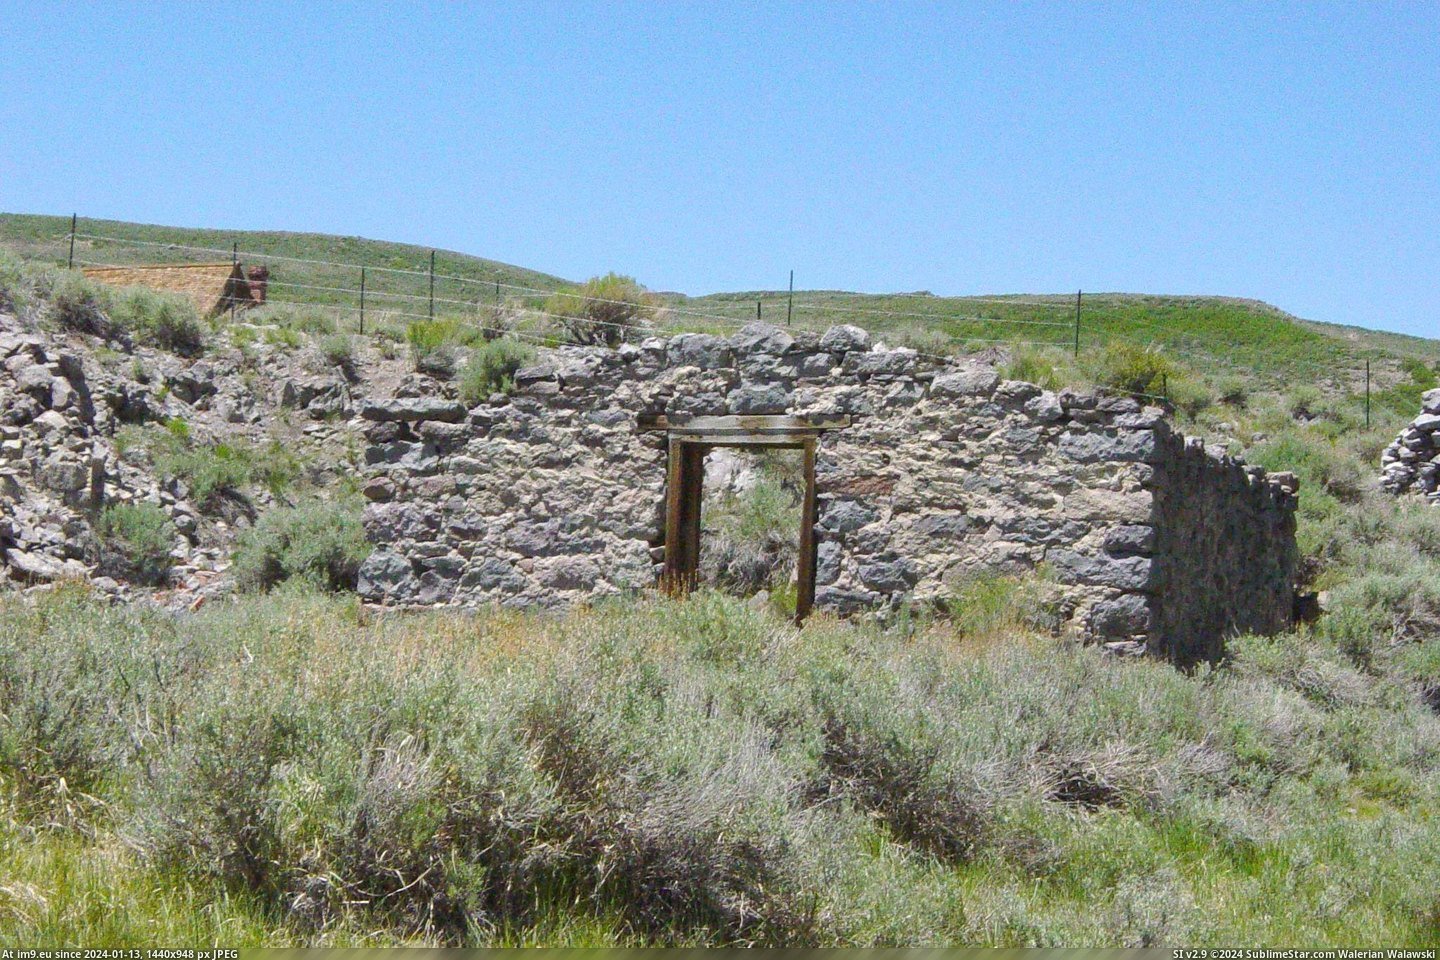 Moyle Warehouse Ruins In Bodie, California (in Bodie - a ghost town in Eastern California)